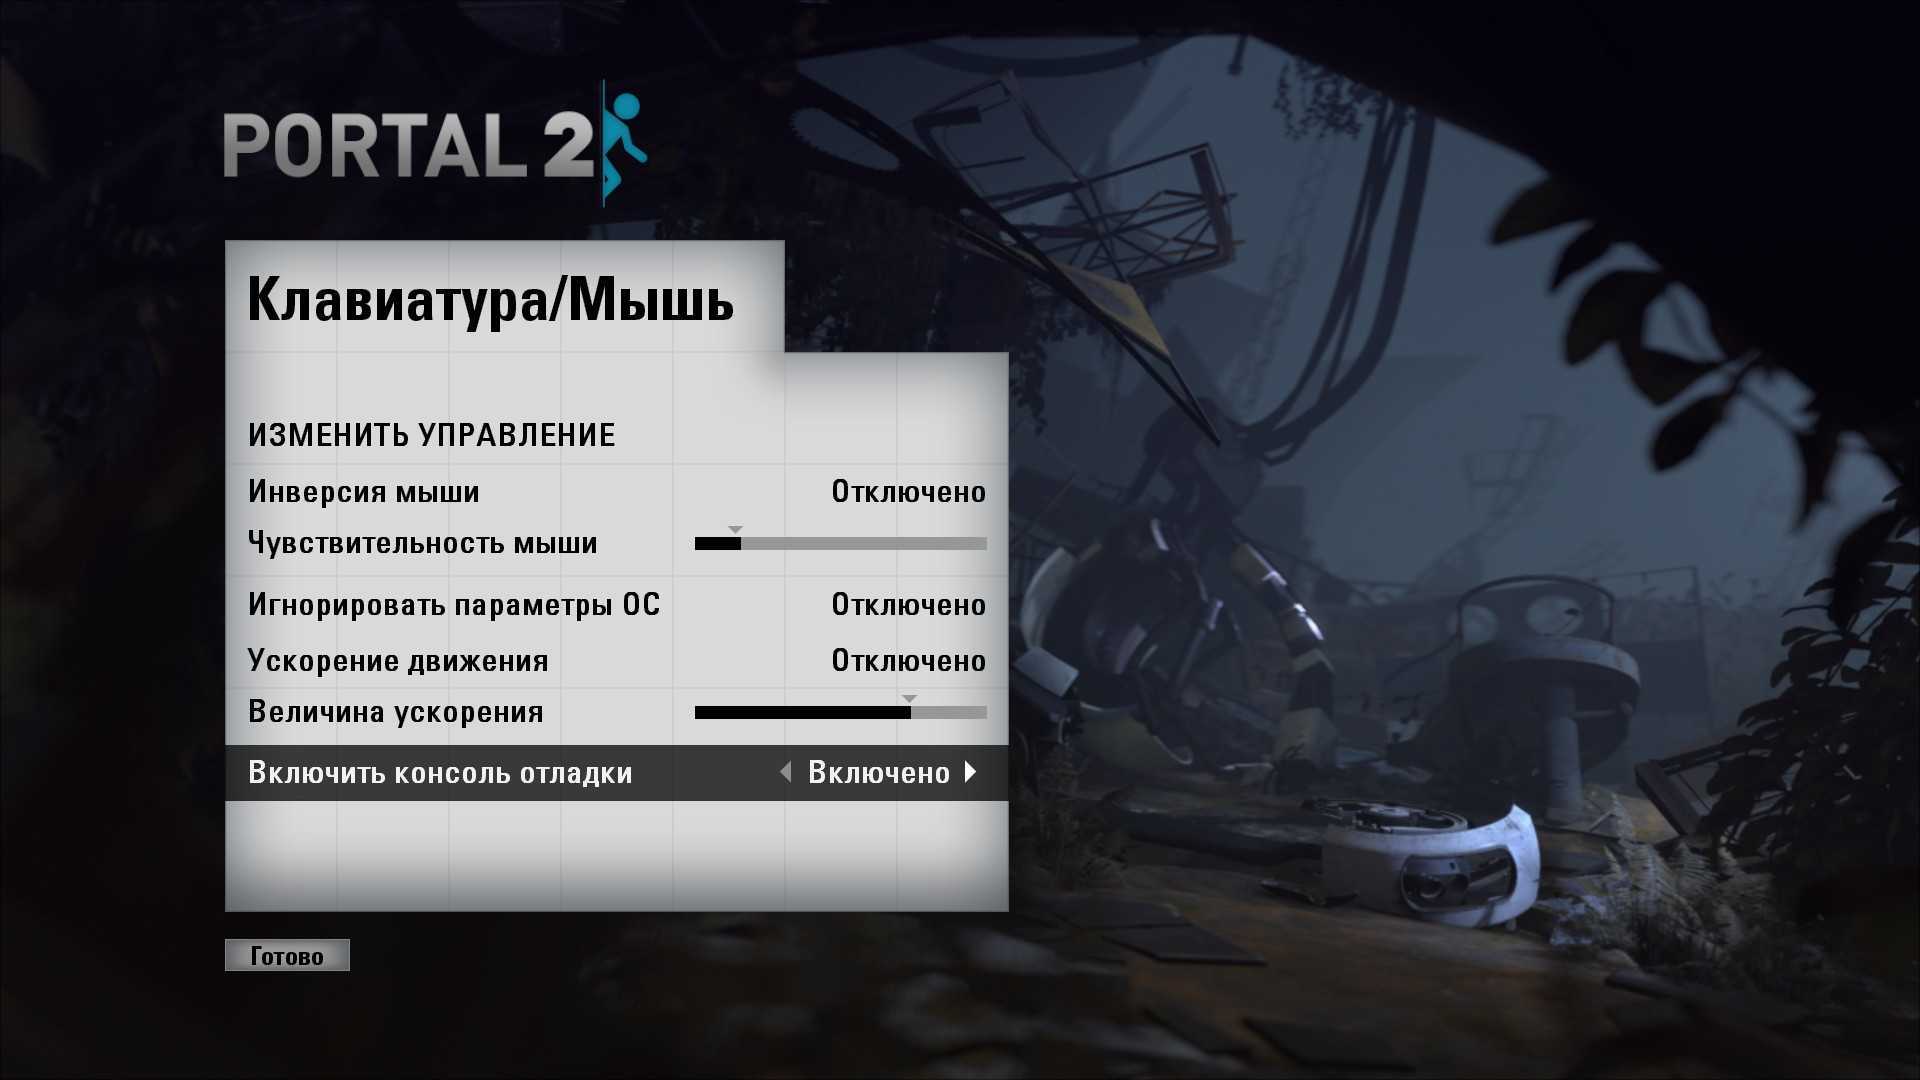 All console commands for portal 2 фото 3